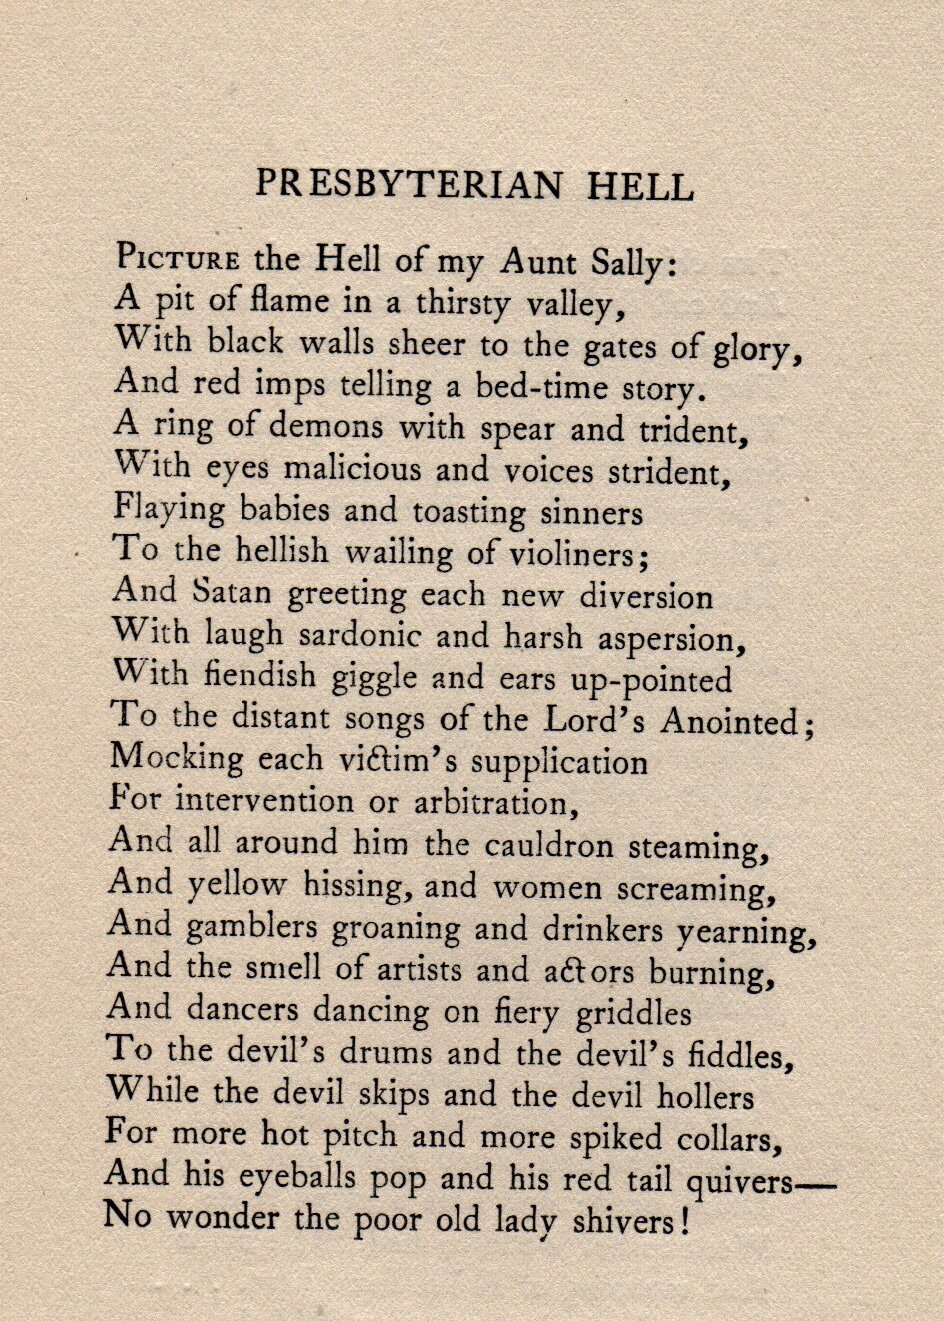  Here’s a sample of Starrett’s poetry from the booklet.  